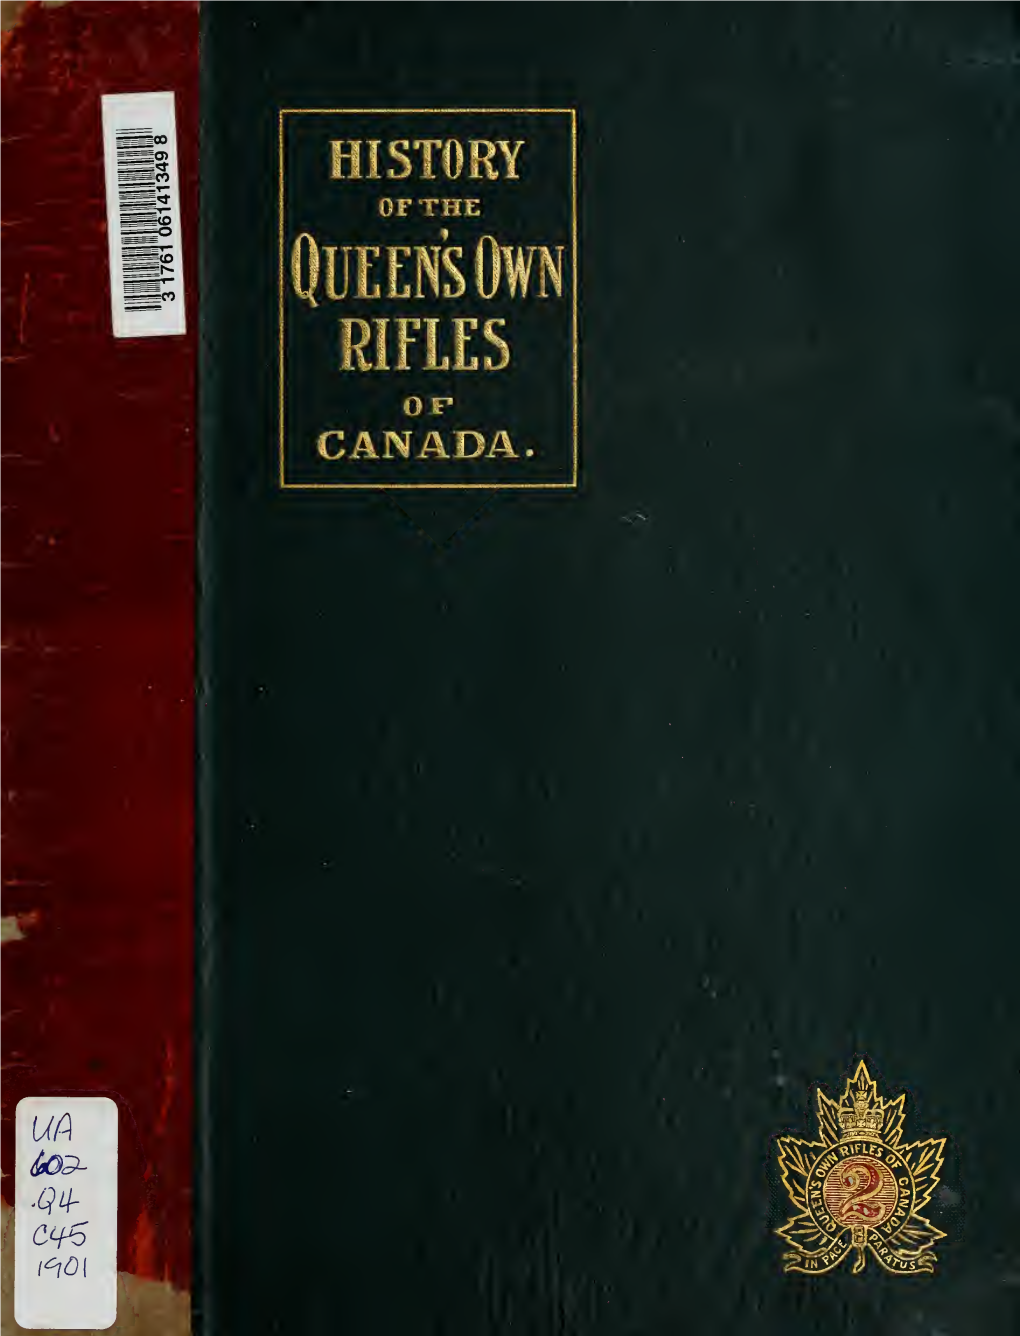 The Queen's Own Rifles of Canada